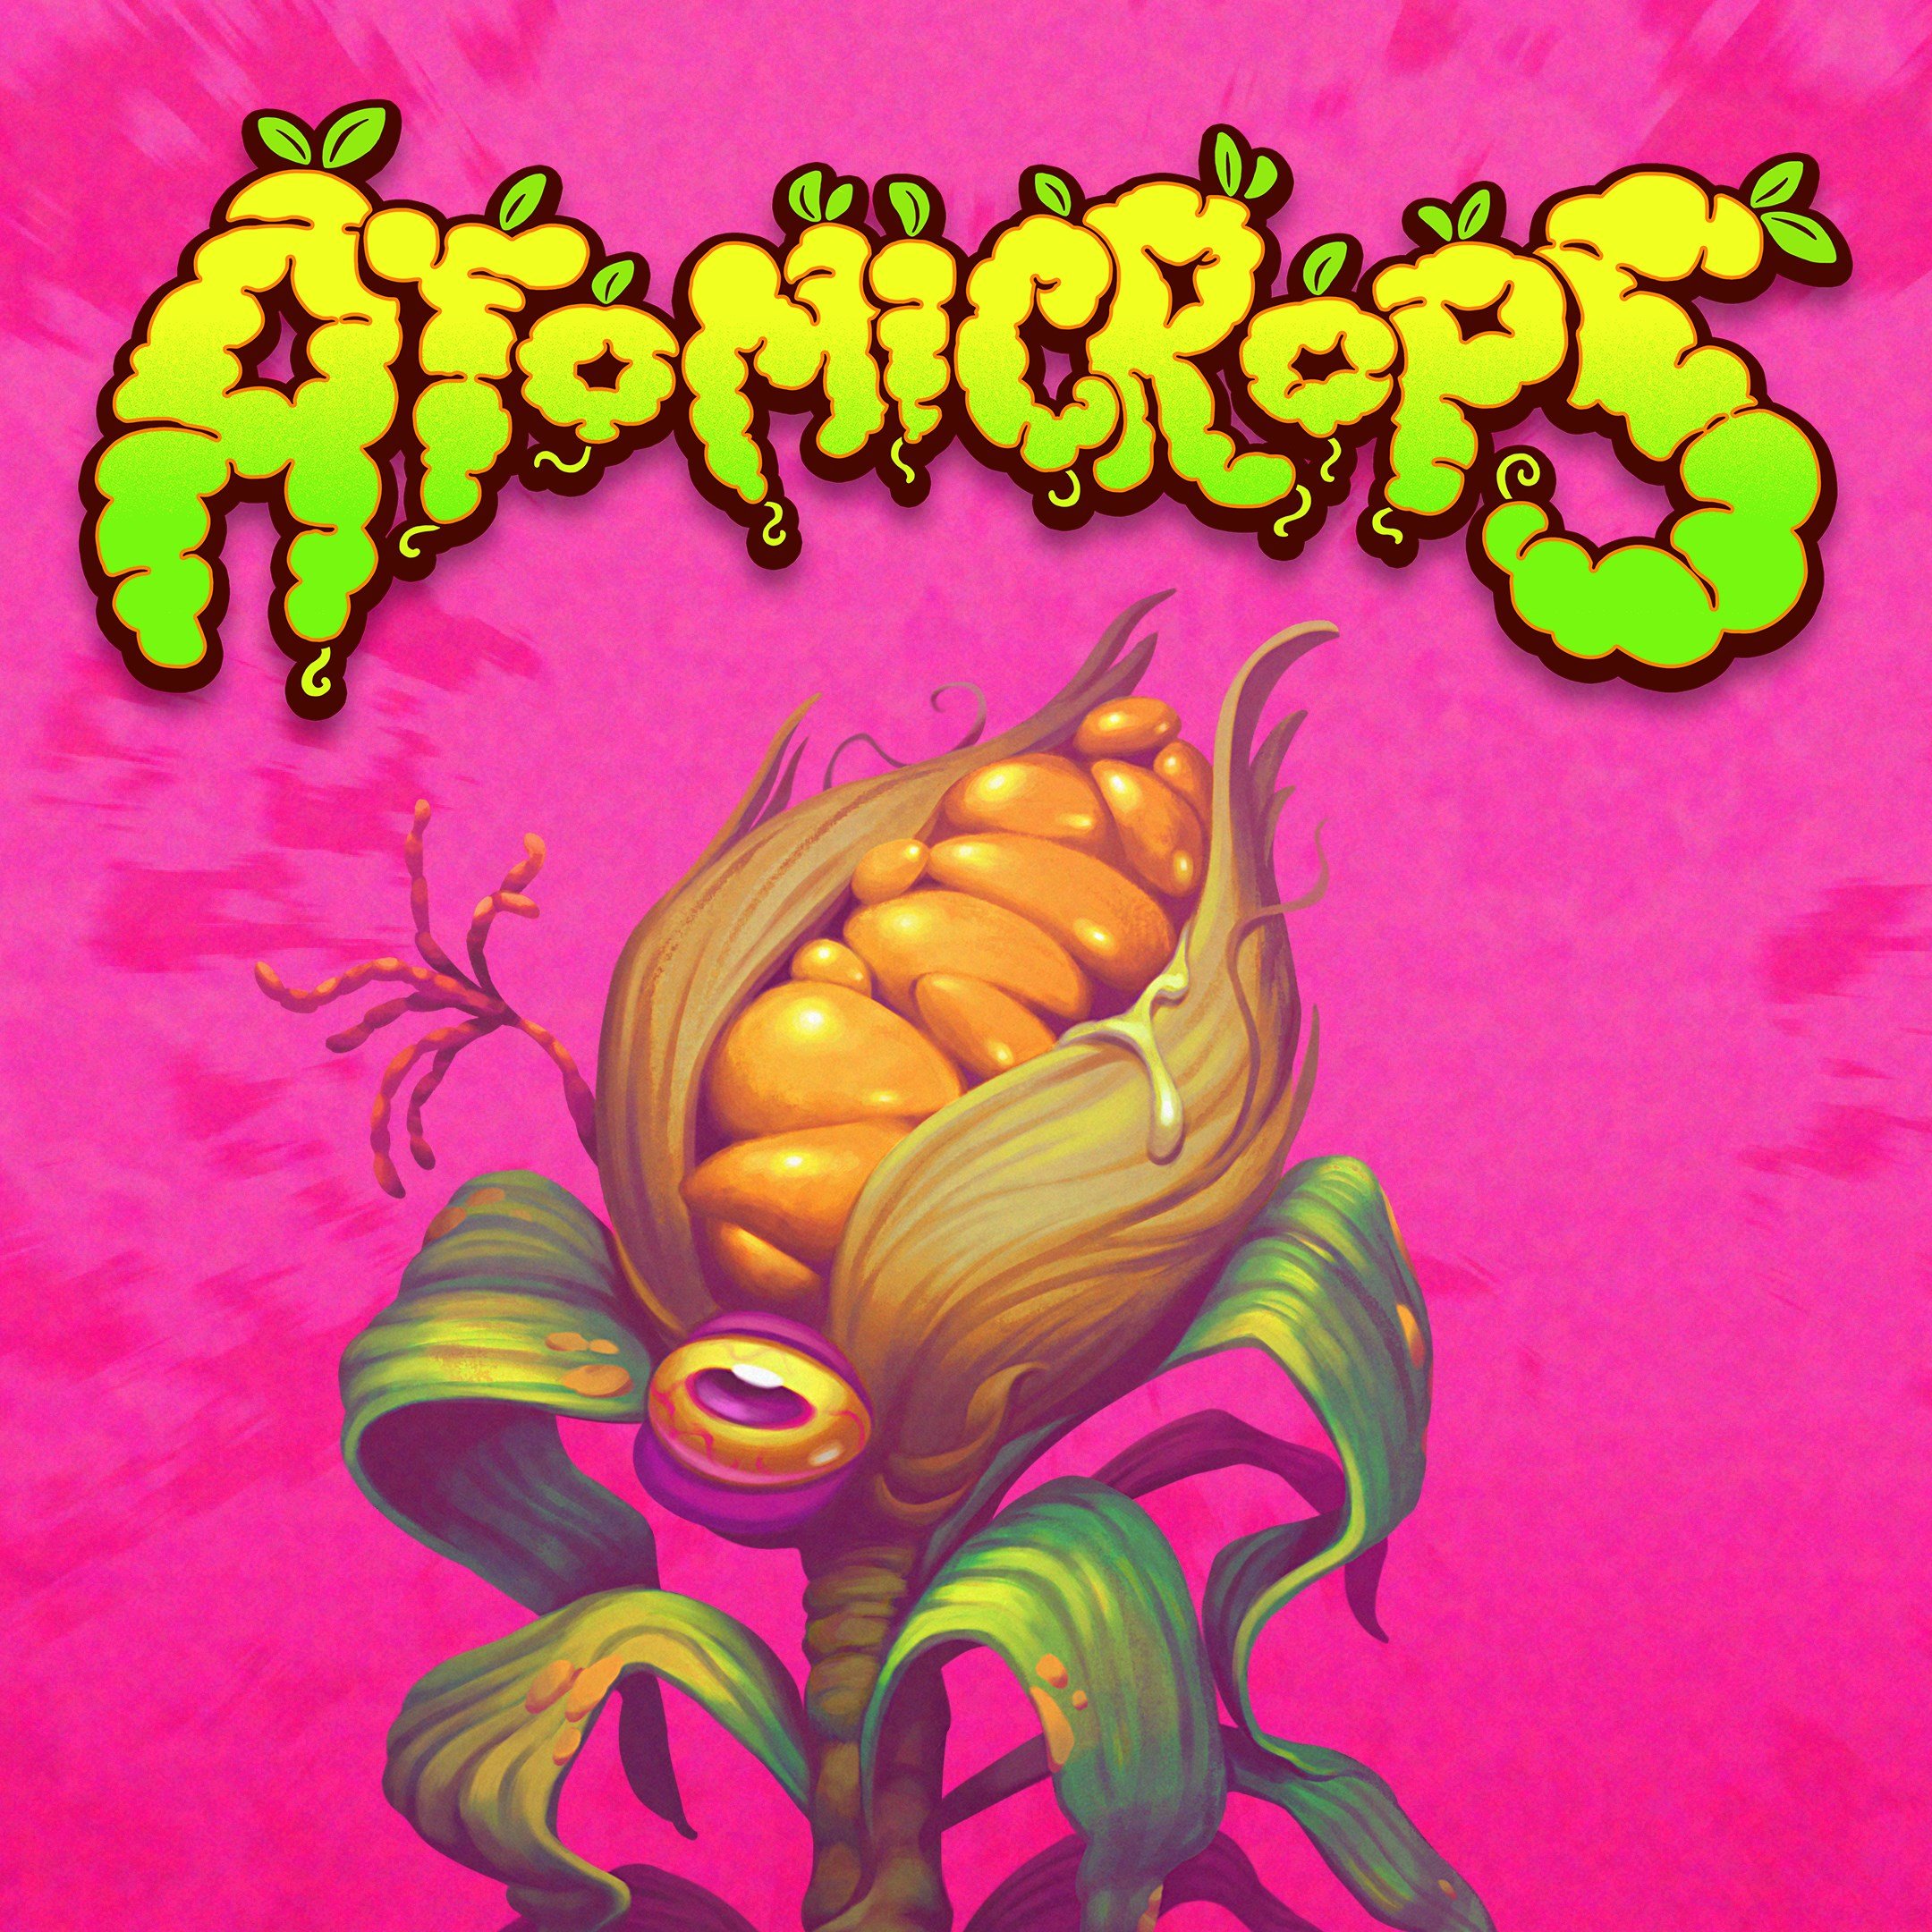 Boxart for Atomicrops